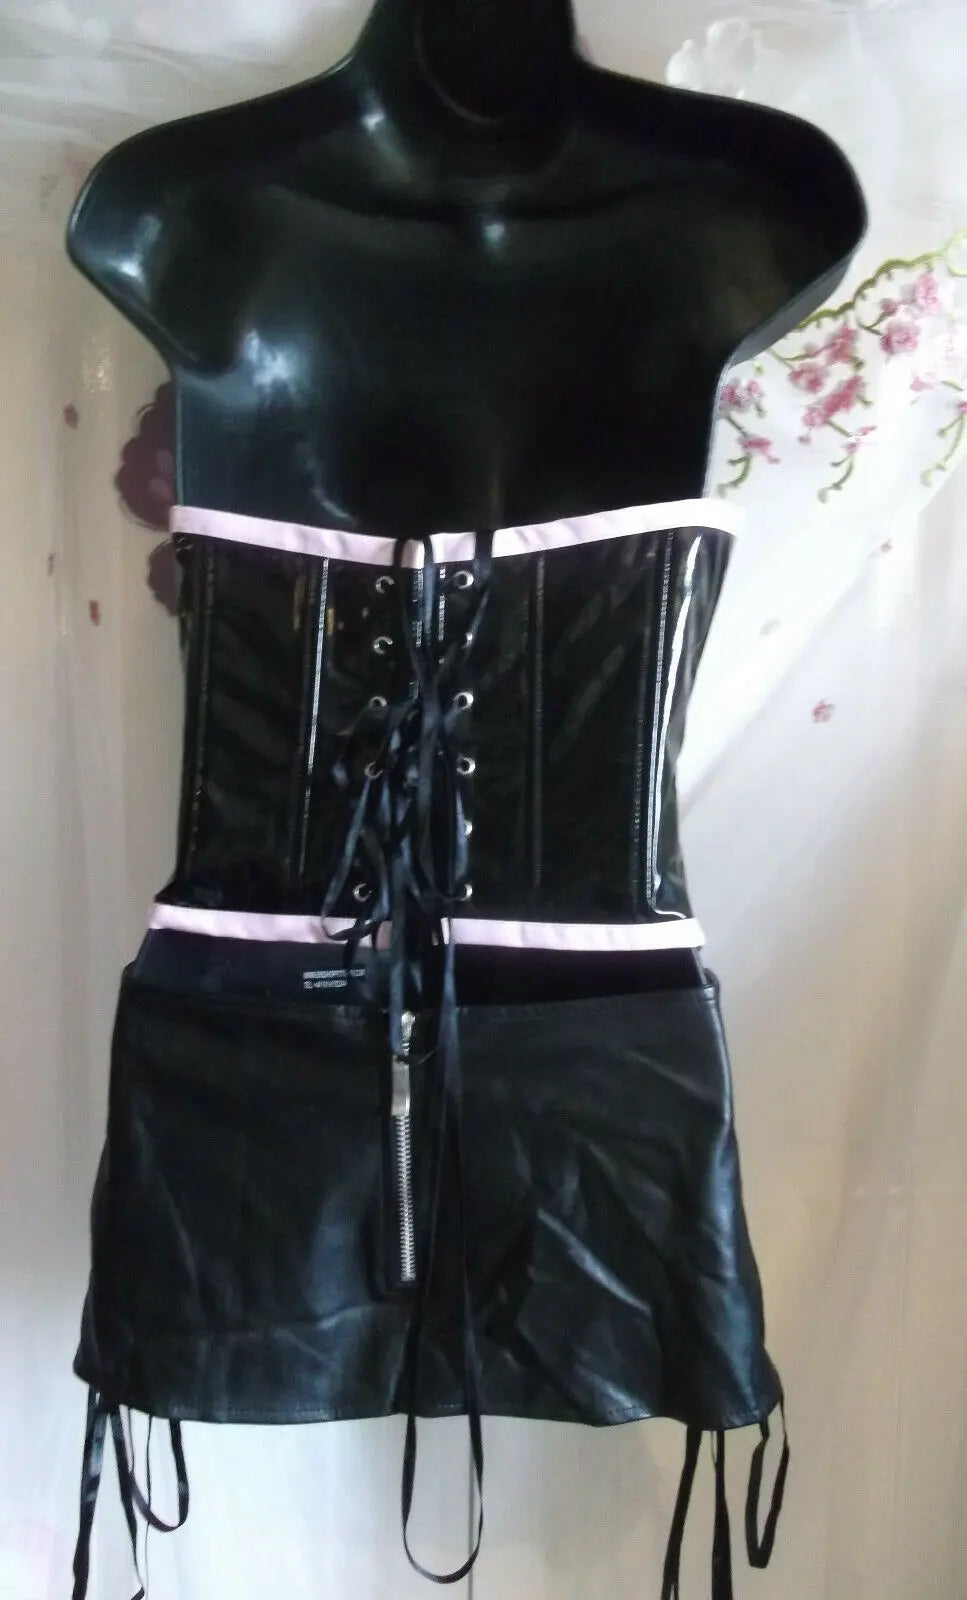 Ann Summers blck pvc & pink edging Basque Corset Goth Emo New Without Tags.size8 Ann Summers